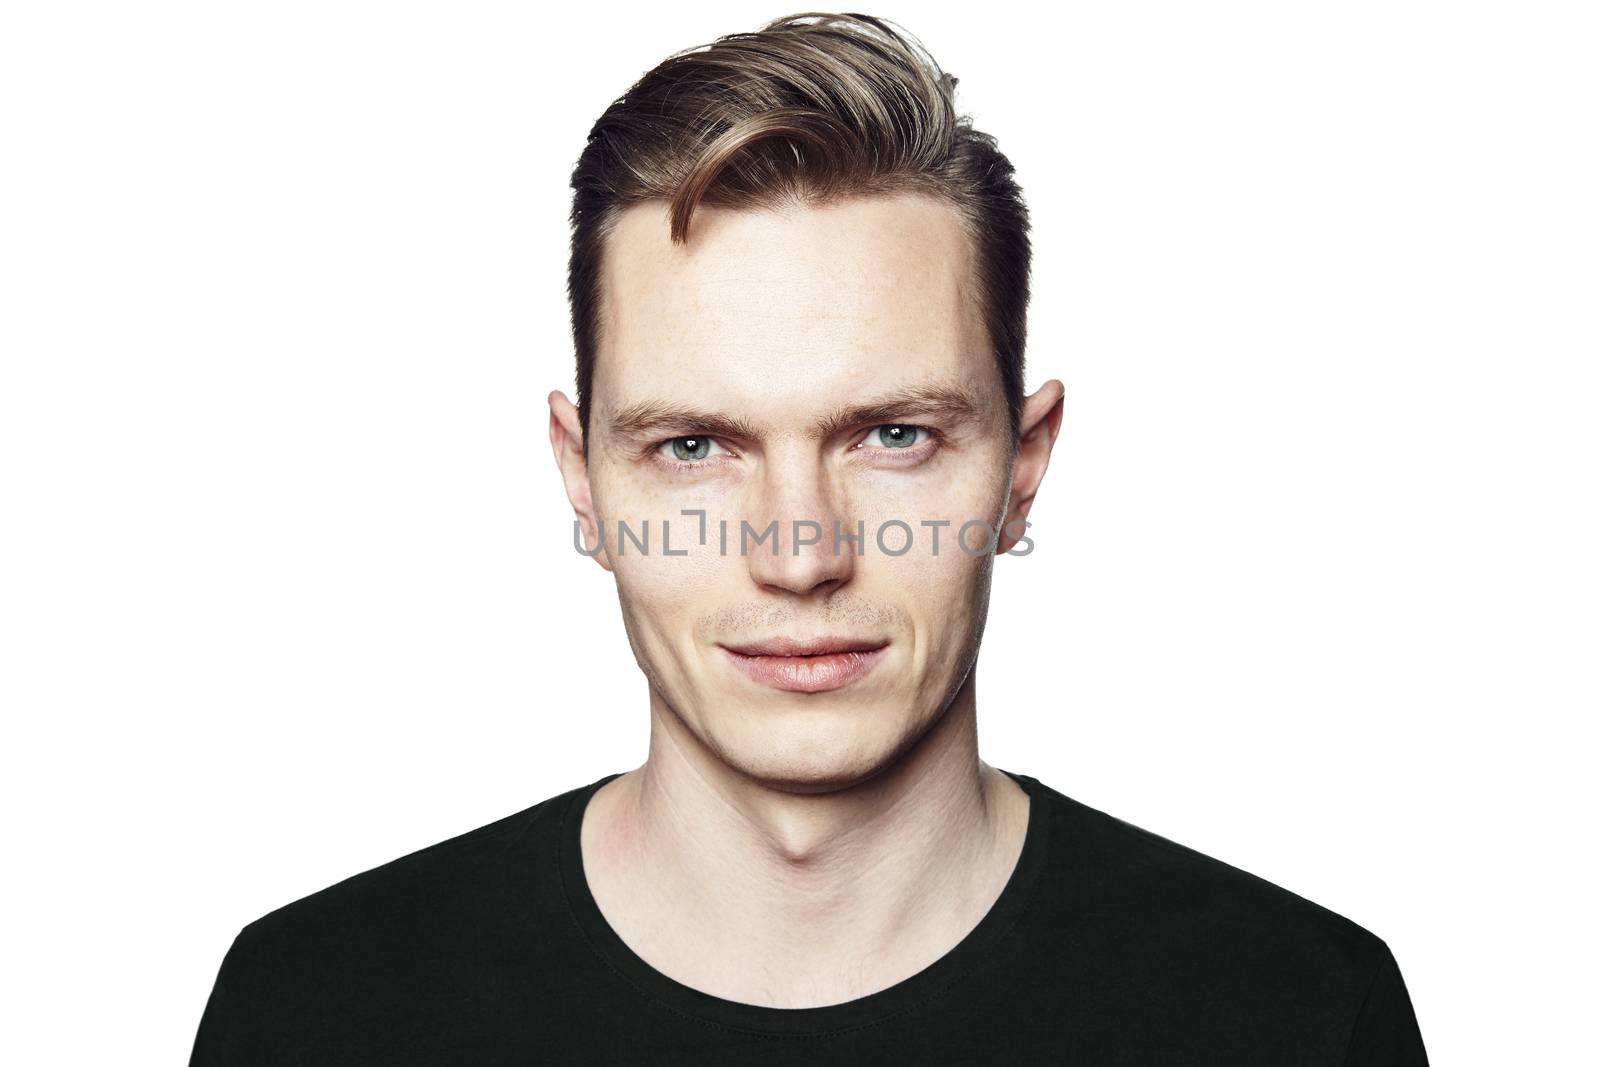 Young man looking at the camera. Isolated on white background. Horizontal format, he has a serious face, he is wearing a black T-shirt.
